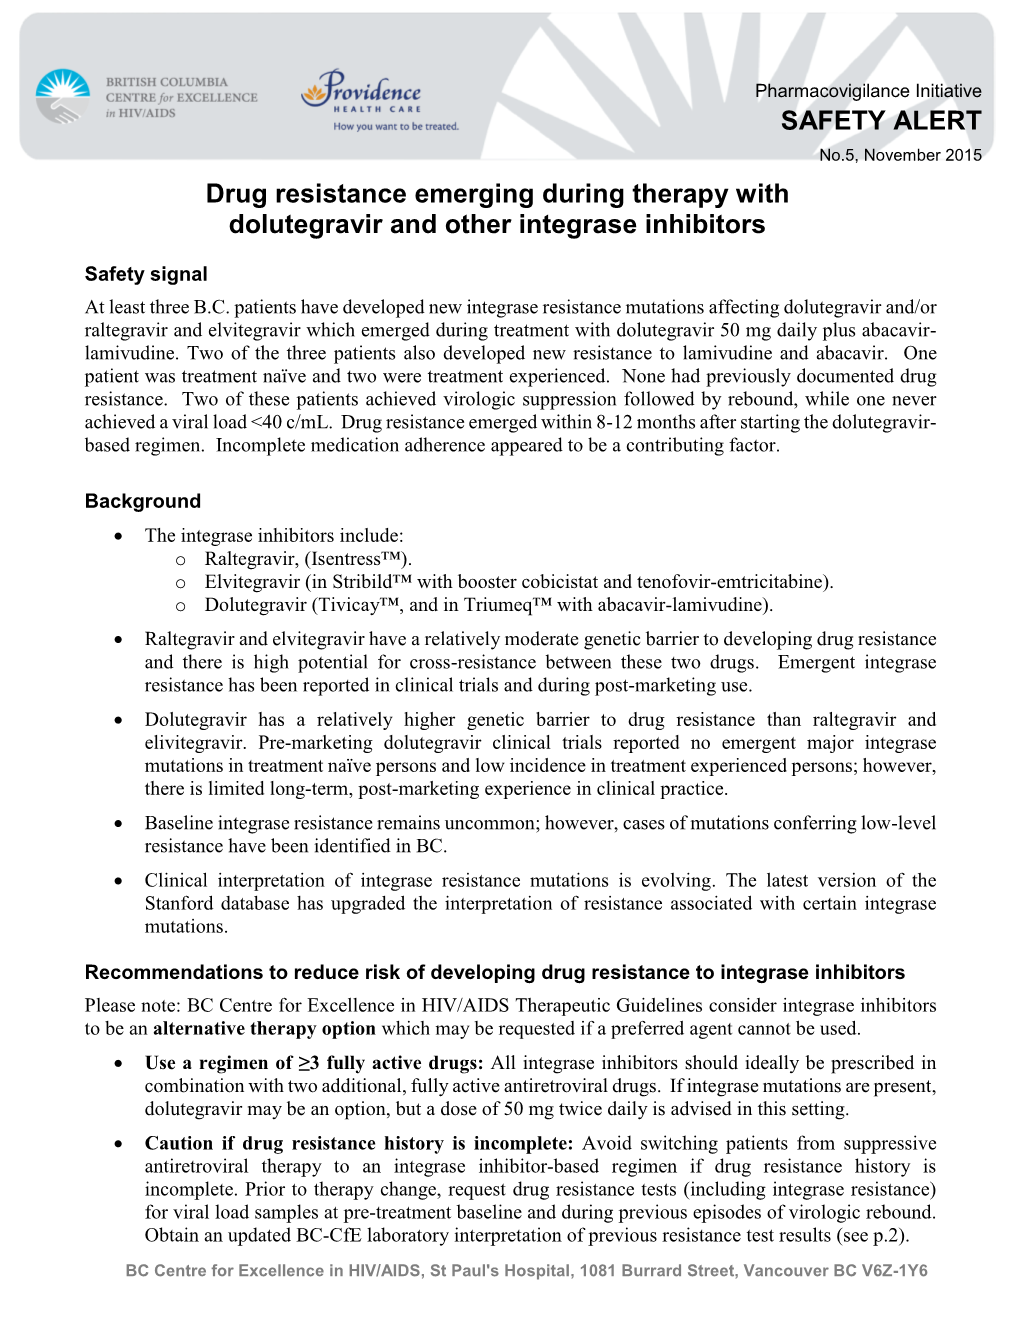 Drug Resistance Emerging During Therapy with Dolutegravir and Other Integrase Inhibitors